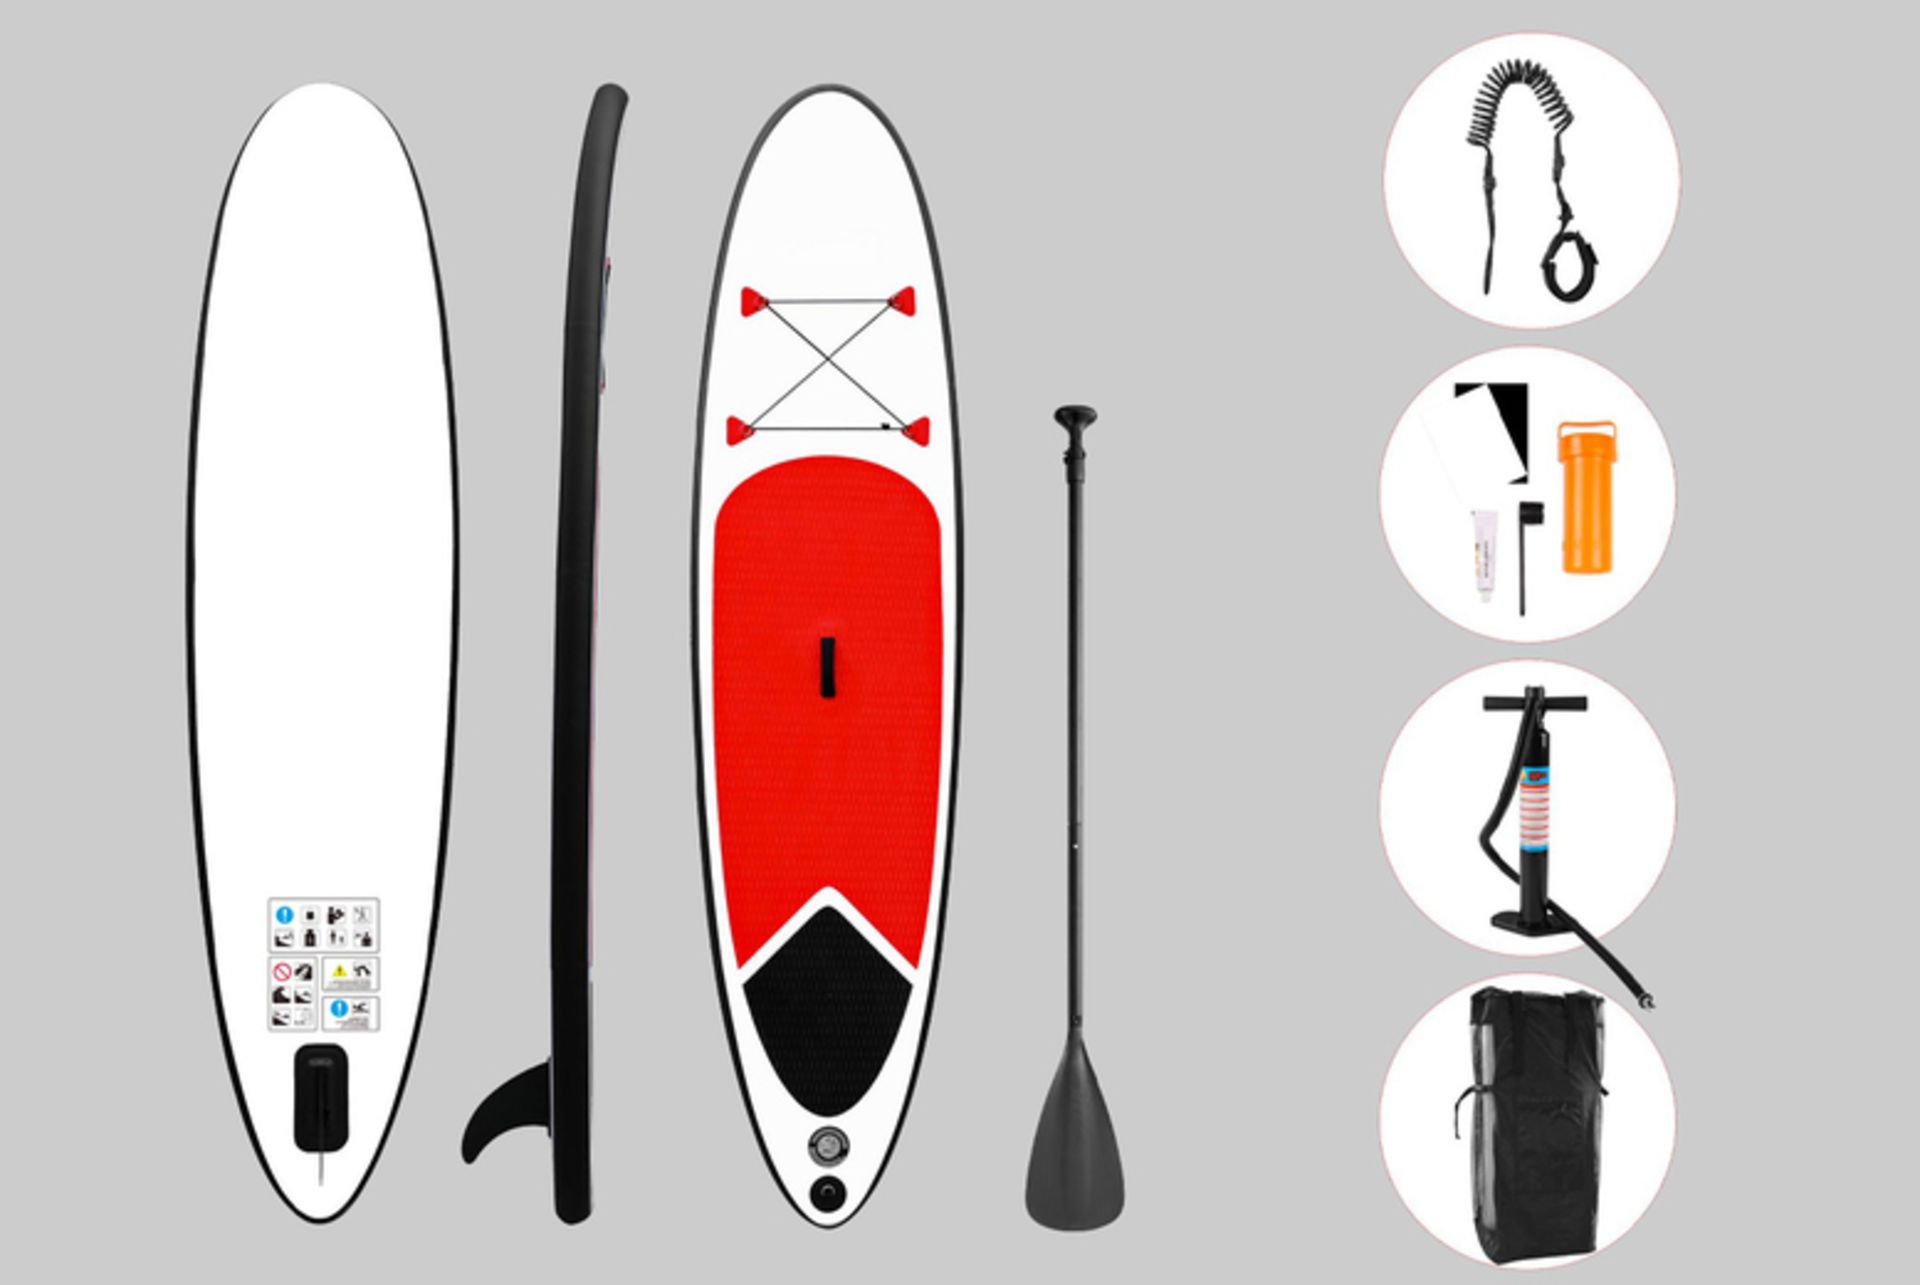 FREE DELIVERY - JOBLOT OF 5 X INFLATABLE PADDLE BOARD & ACCESSORIES - RED